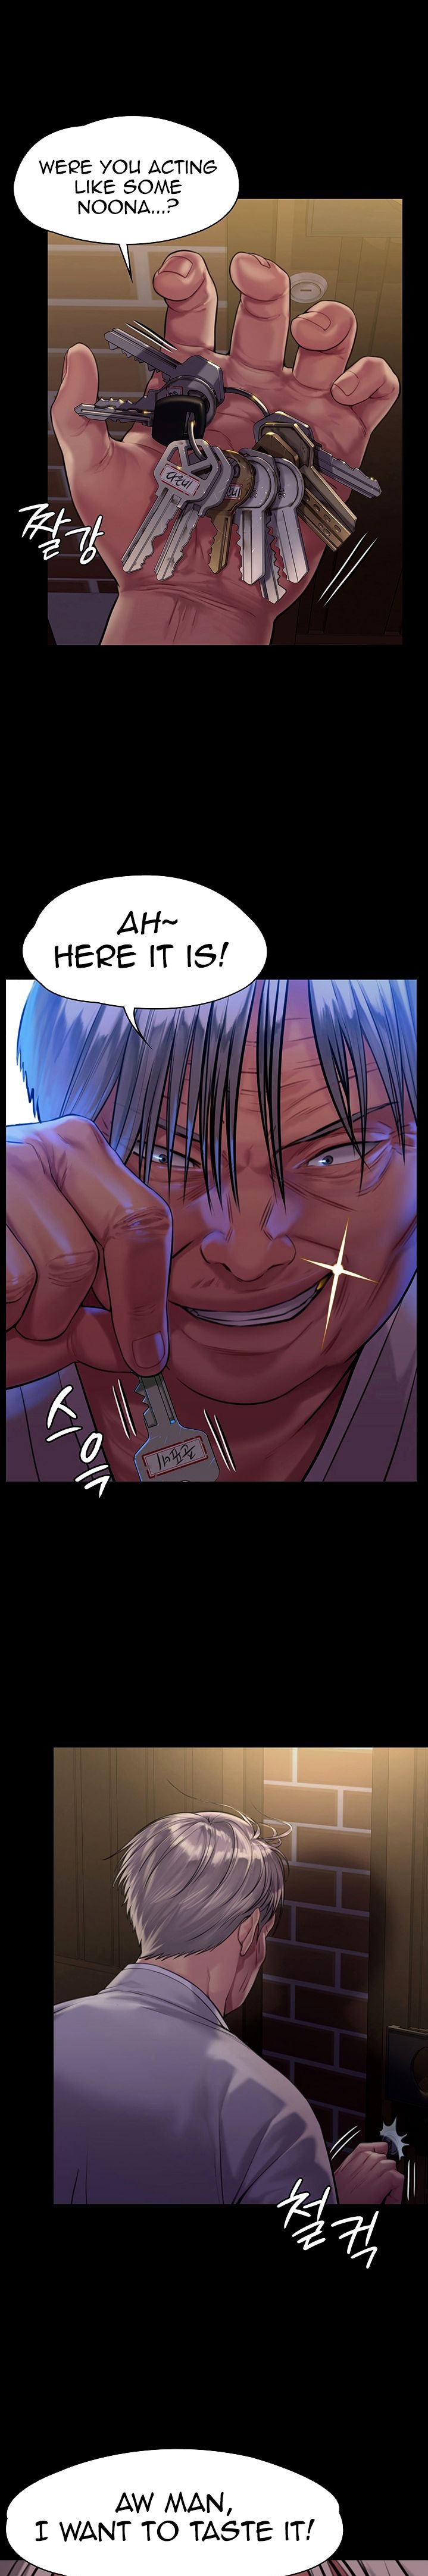 Panel Image 1 for chapter 170 of manhwa Queen Bee on read.oppai.stream